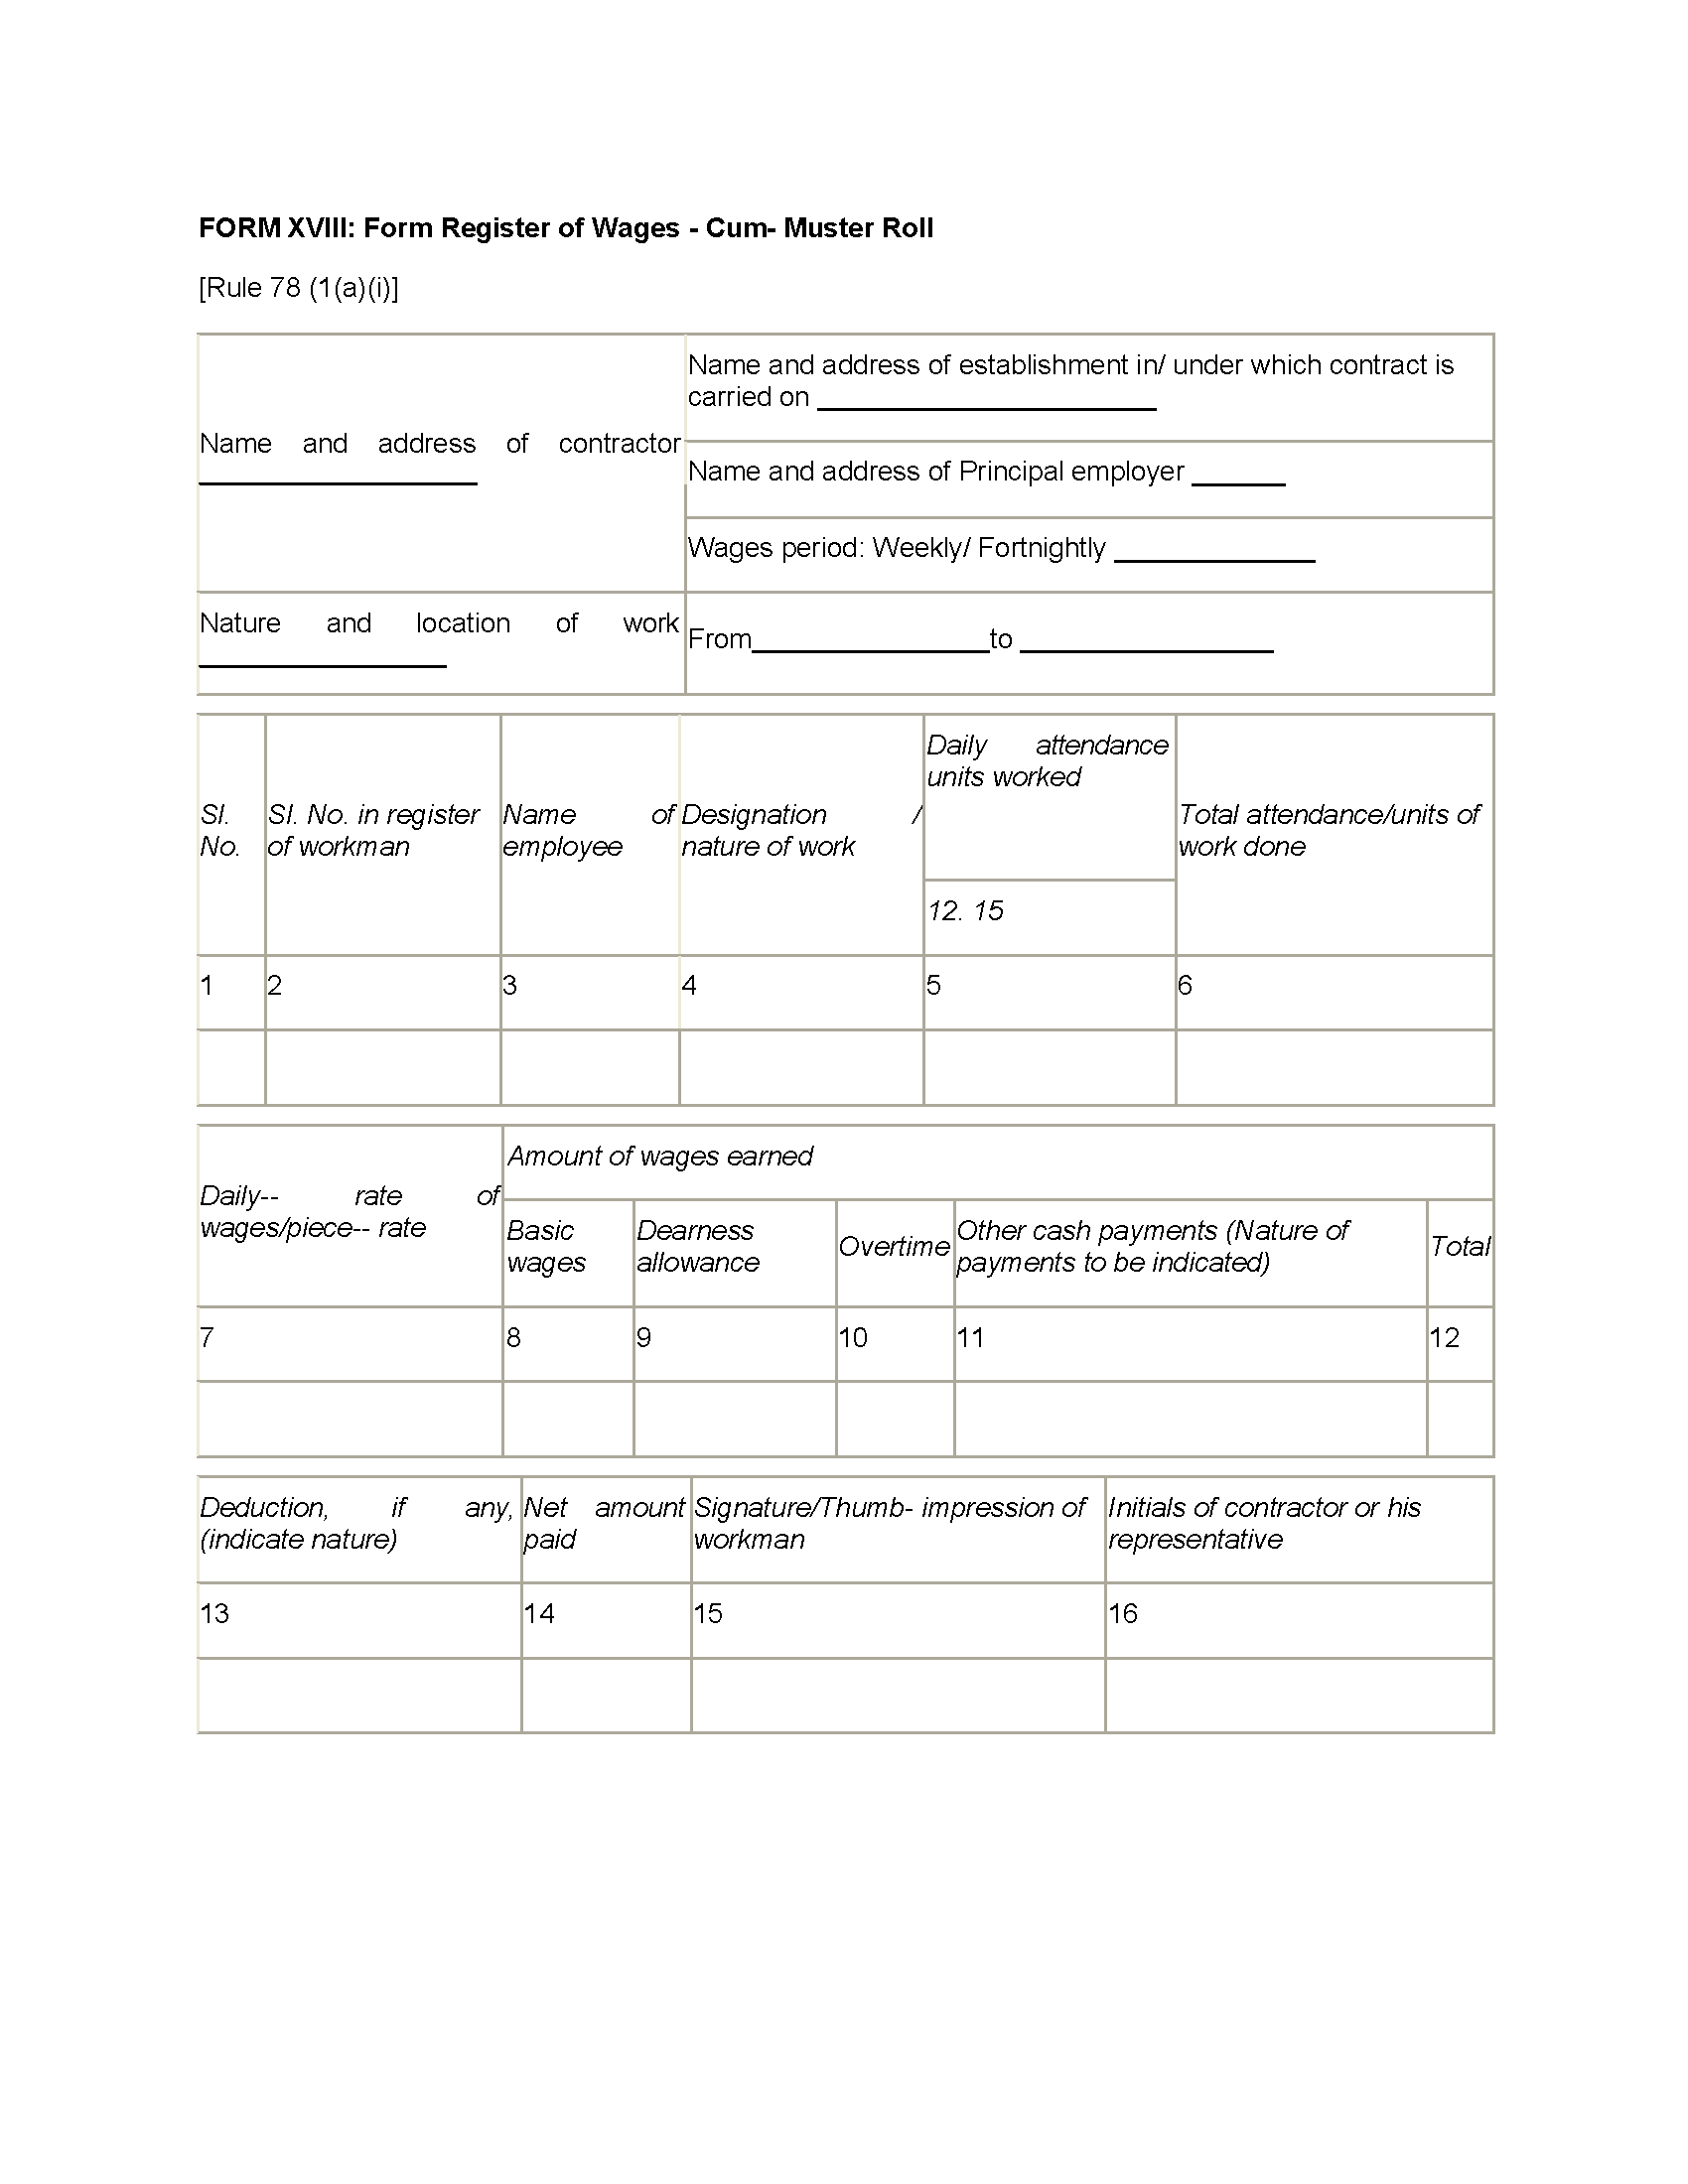 203 - FORM XVII Register of wages-converted